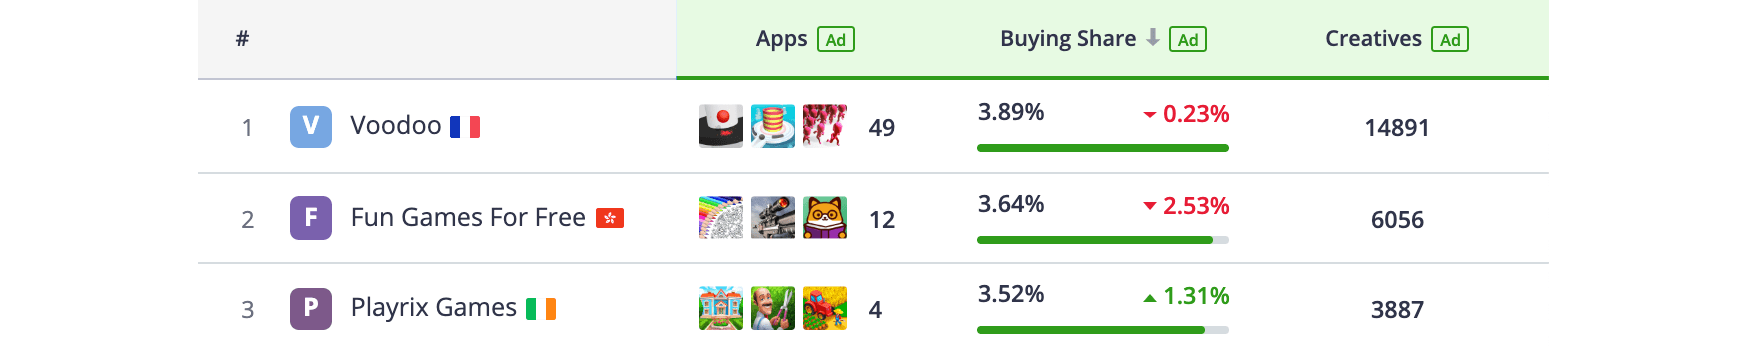 Top 3 Publishers, iOS